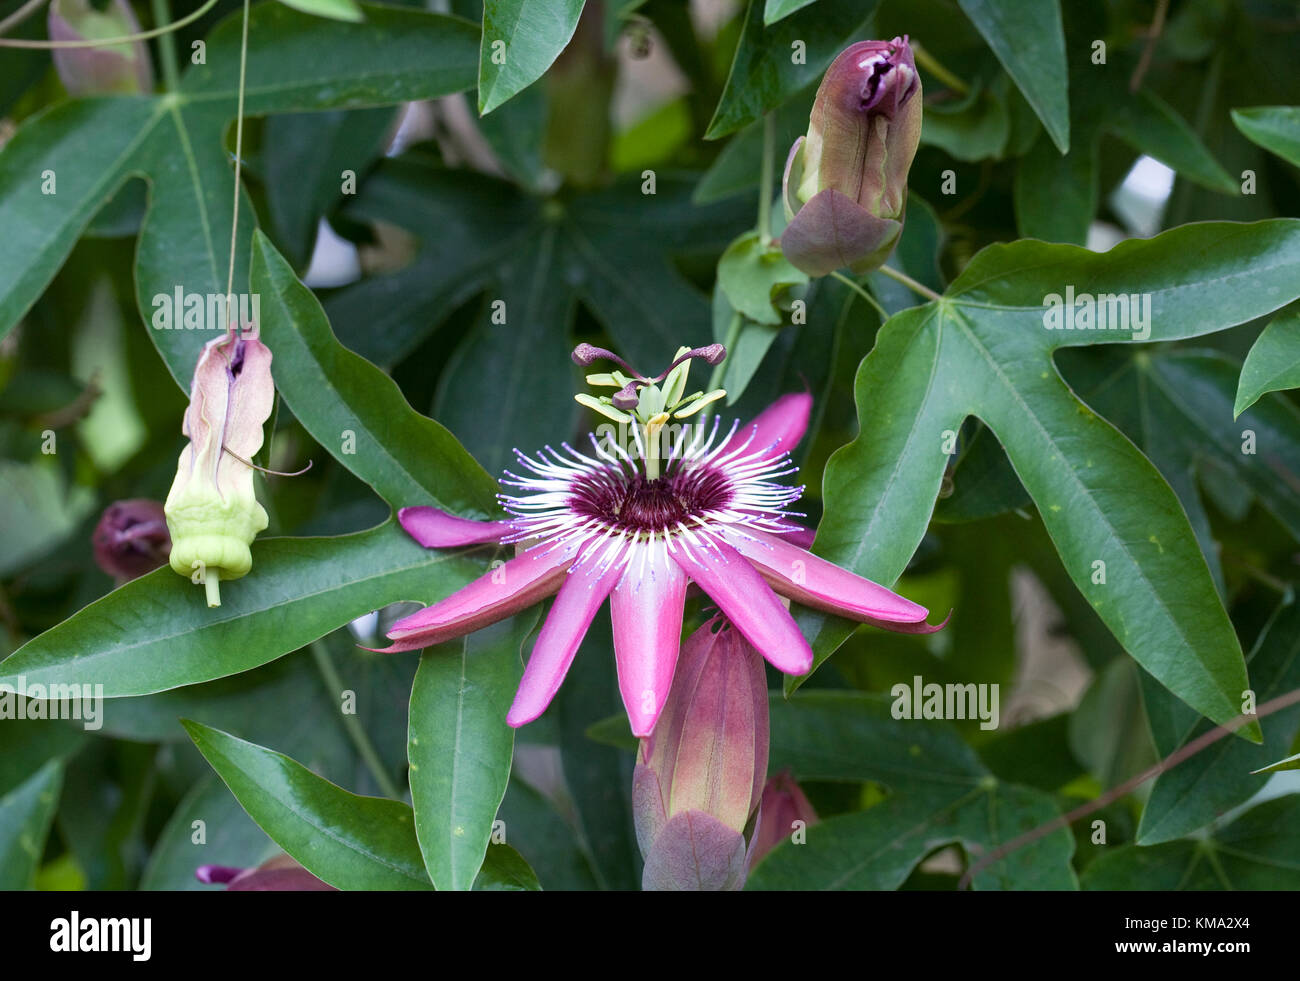 Passiflora x violacea flower growing in a protected environment. Stock Photo